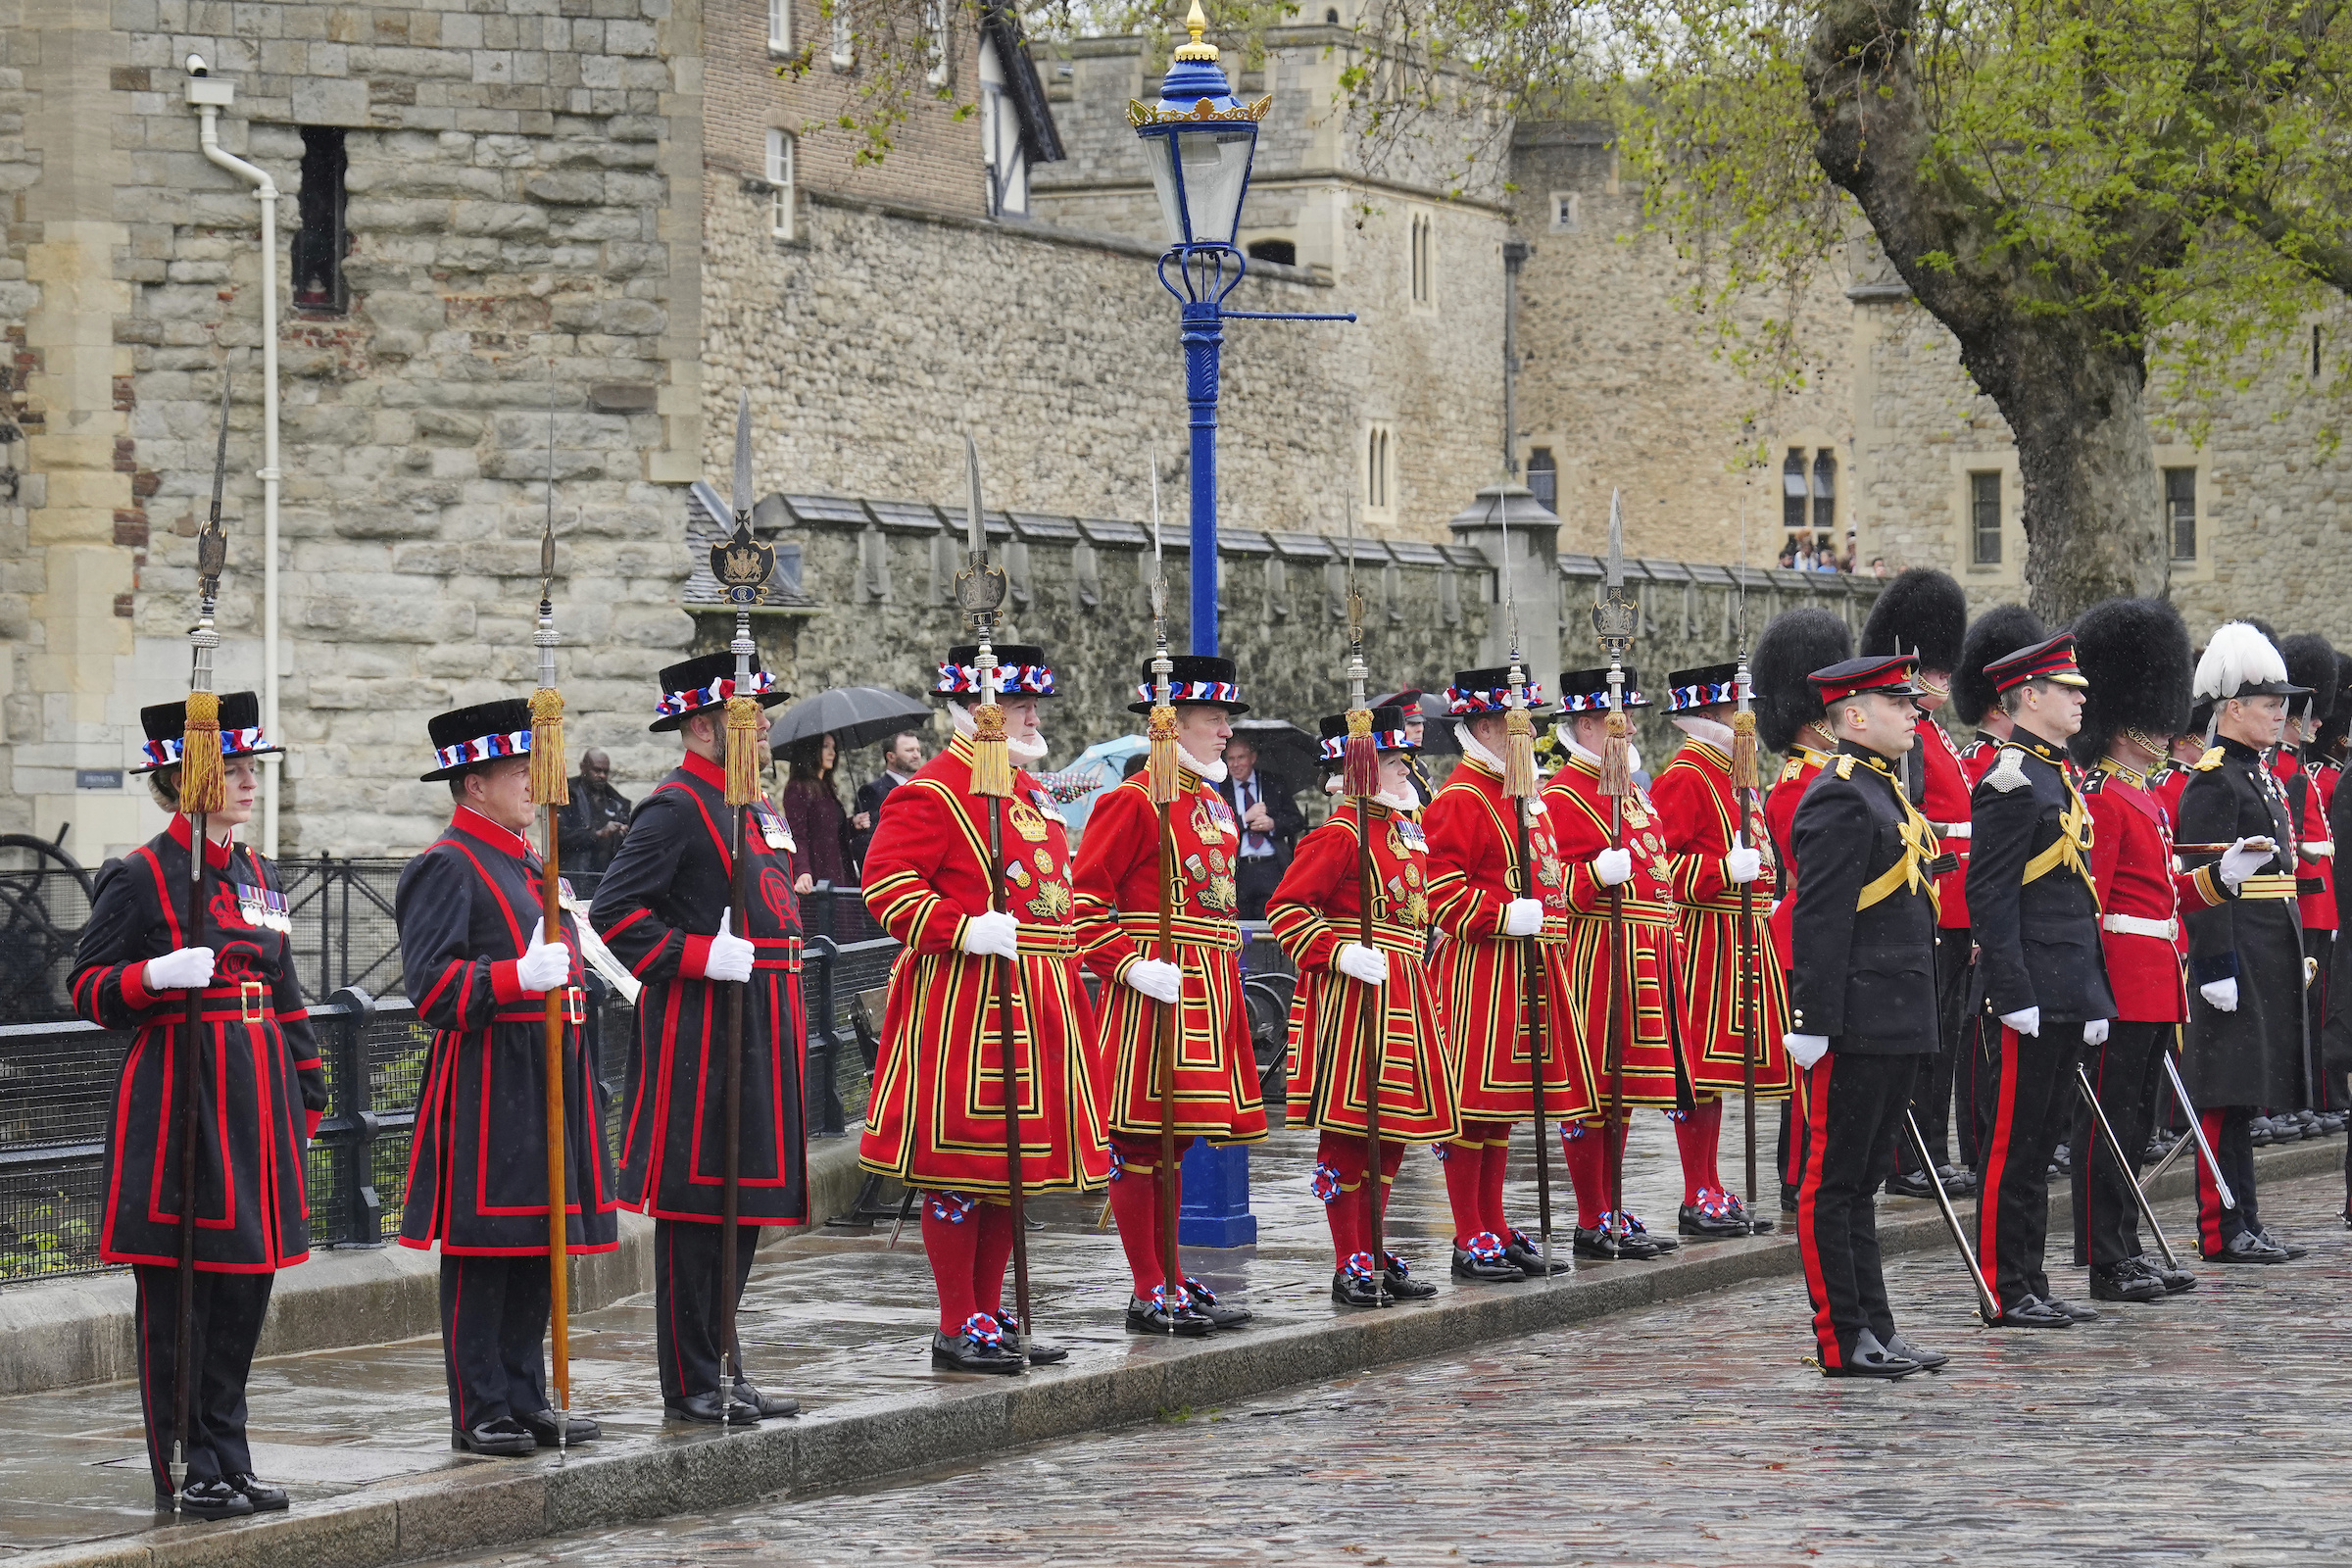 A row of Yeoman Warders wearing red state dress uniform and blue and red undress uniform. There is a stone building behind them. 